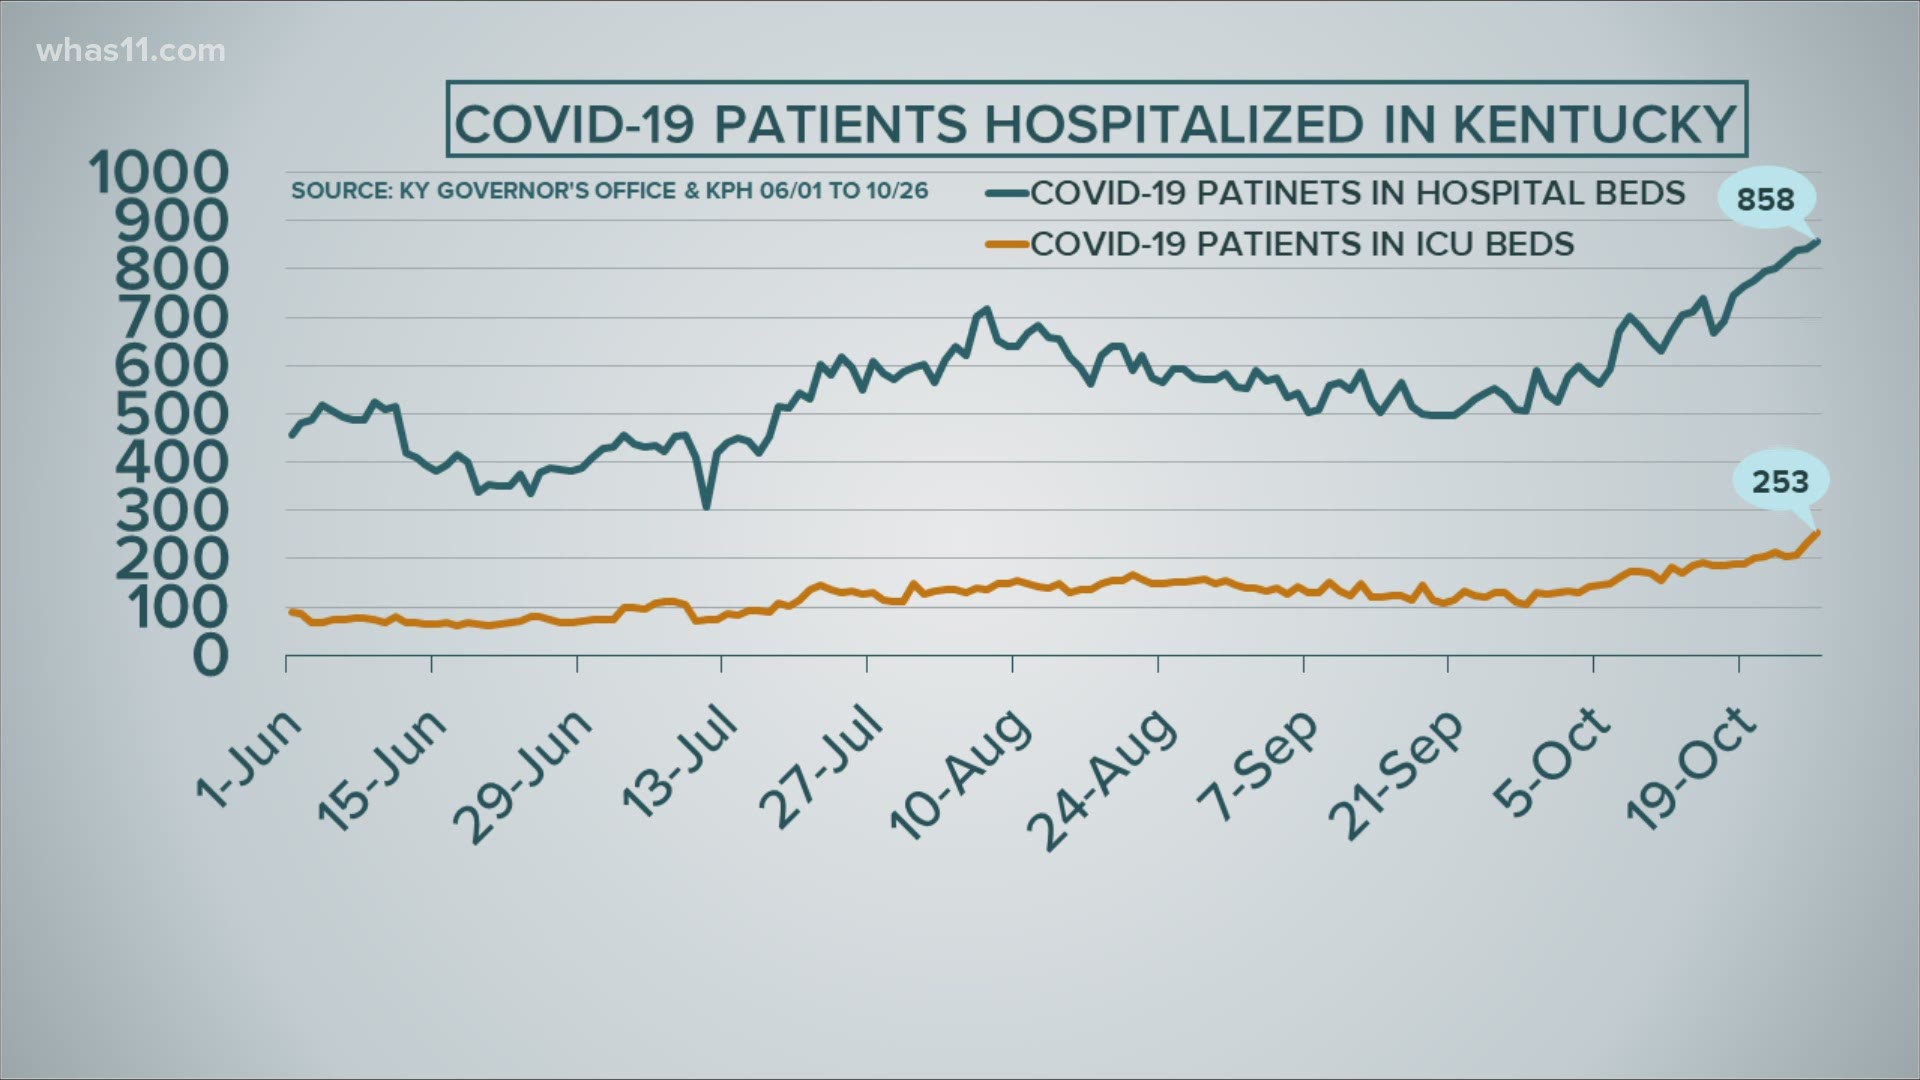 For weeks, we've watched as COVID-19 cases have surged across the country and here at home.
Experts warned, hospitalizations follow case trends.